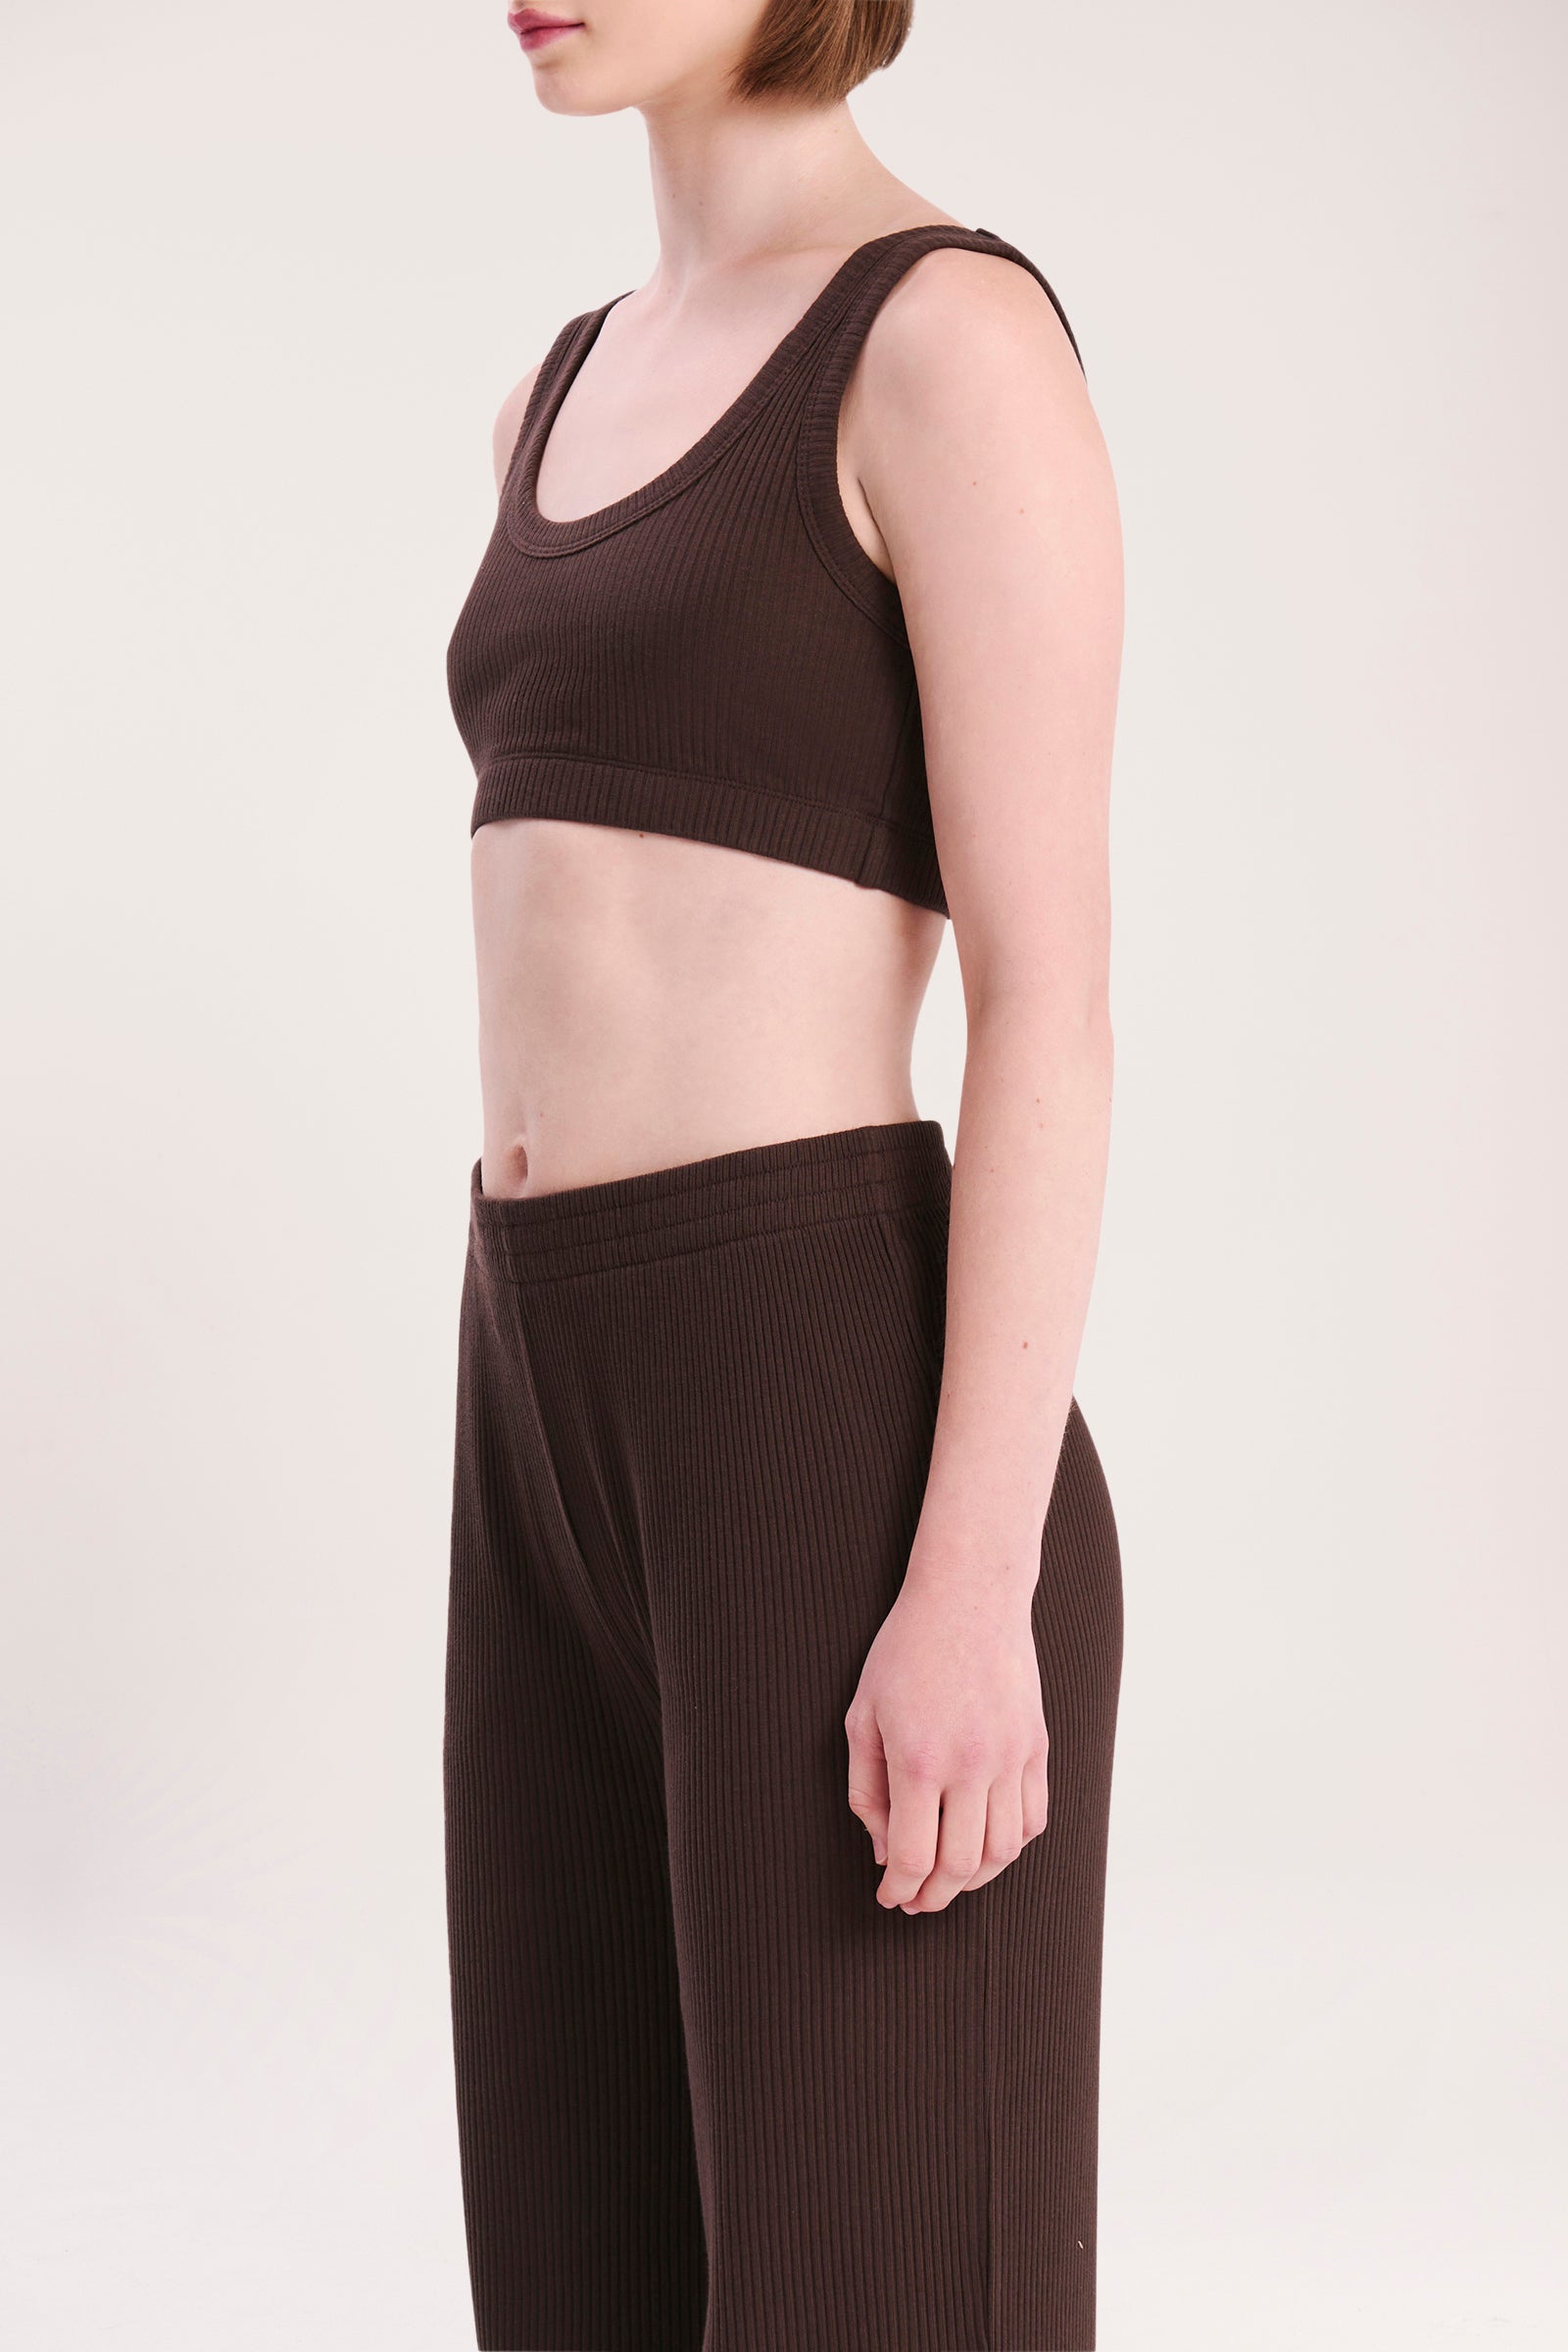 Nude Lucy Lounge Rib Crop In A Brown Cinder Colour 